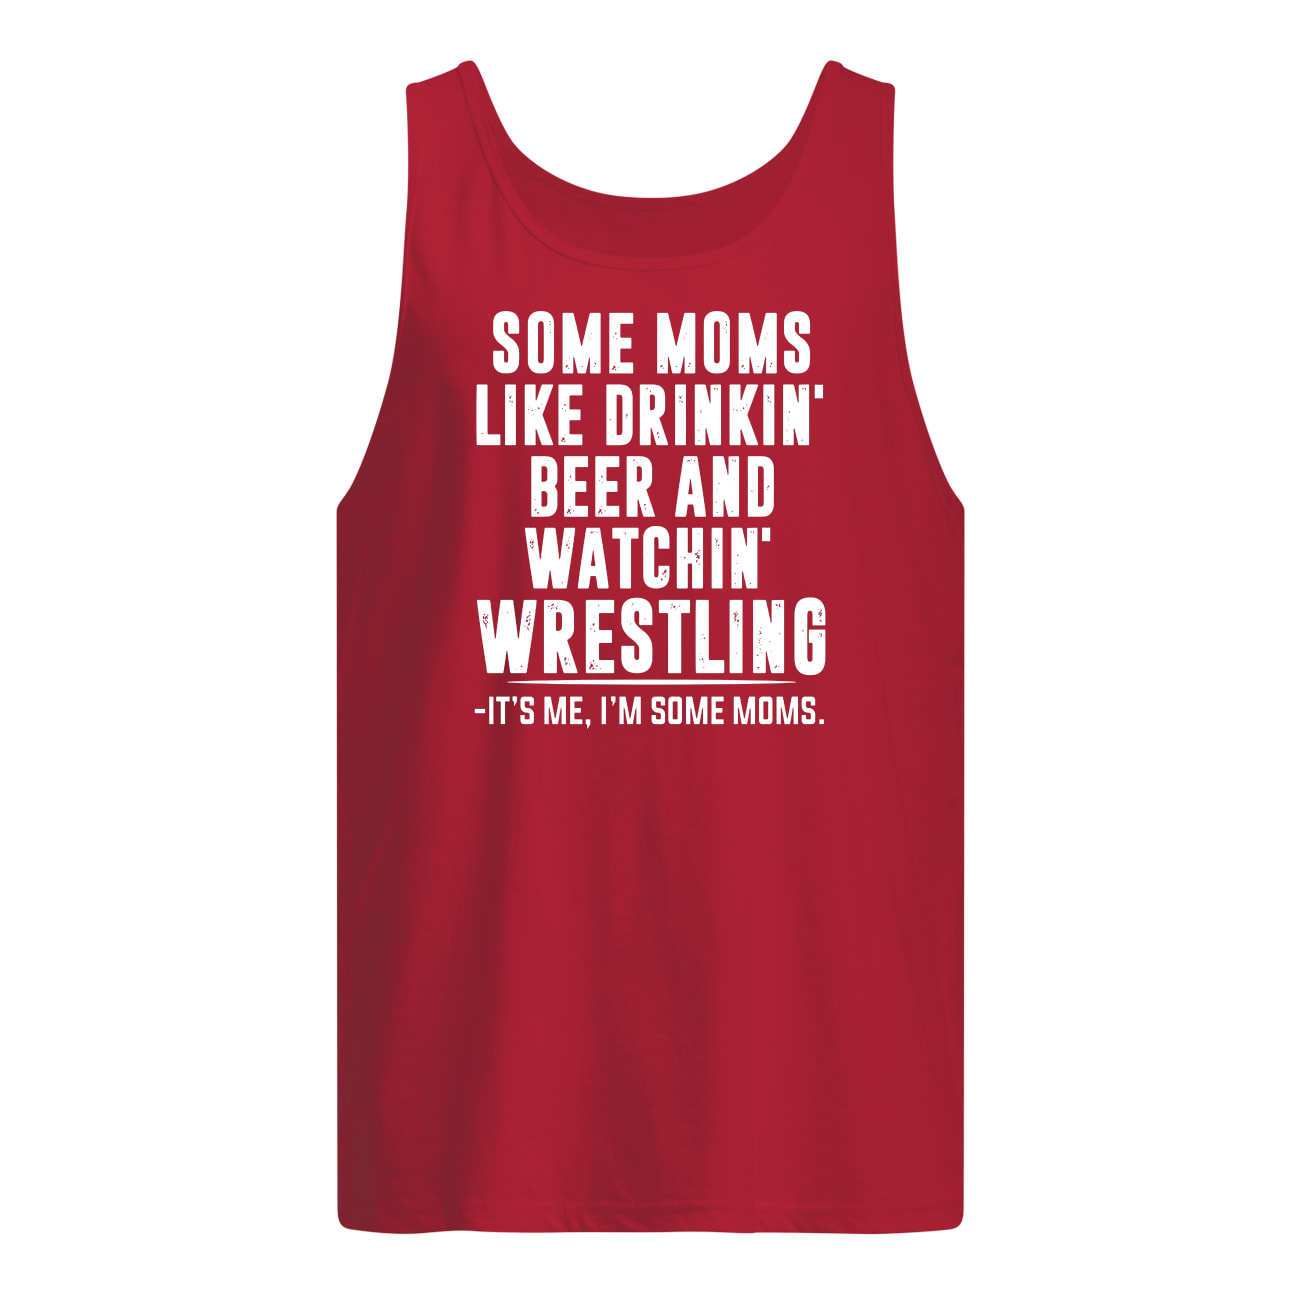 Some moms like drinkin' beer and watchin' wrestling tank top